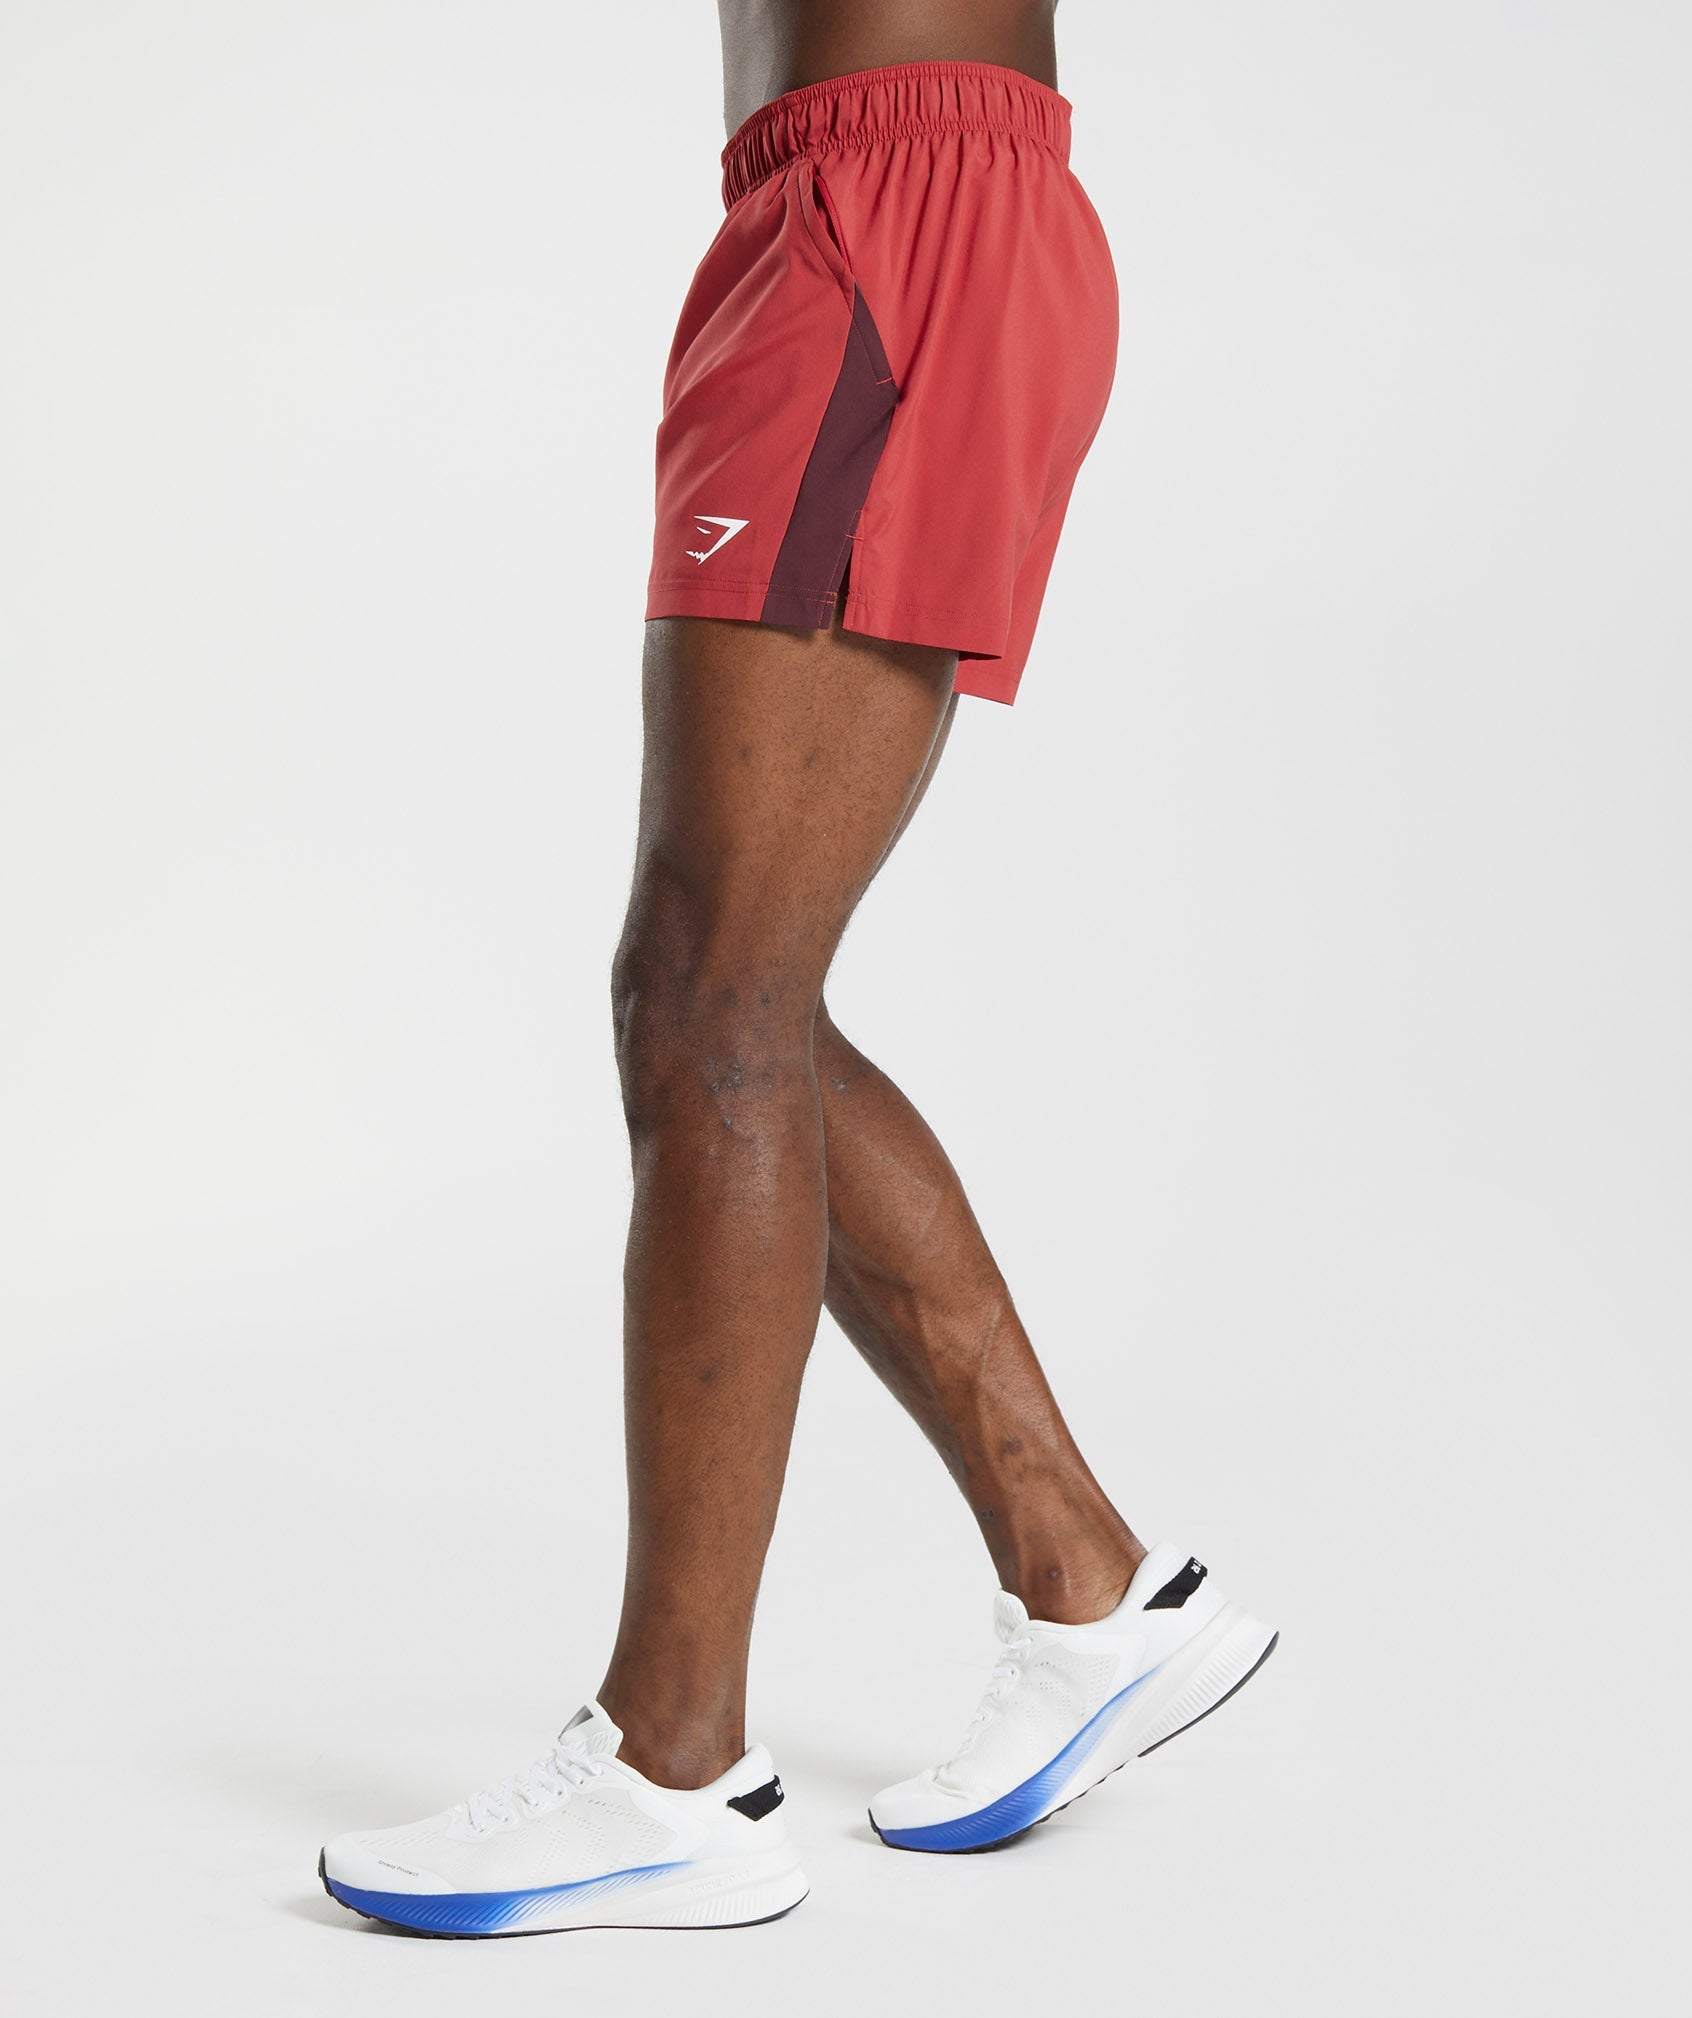 Sport 5" Shorts in Salsa Red/ Baked Maroon - view 3